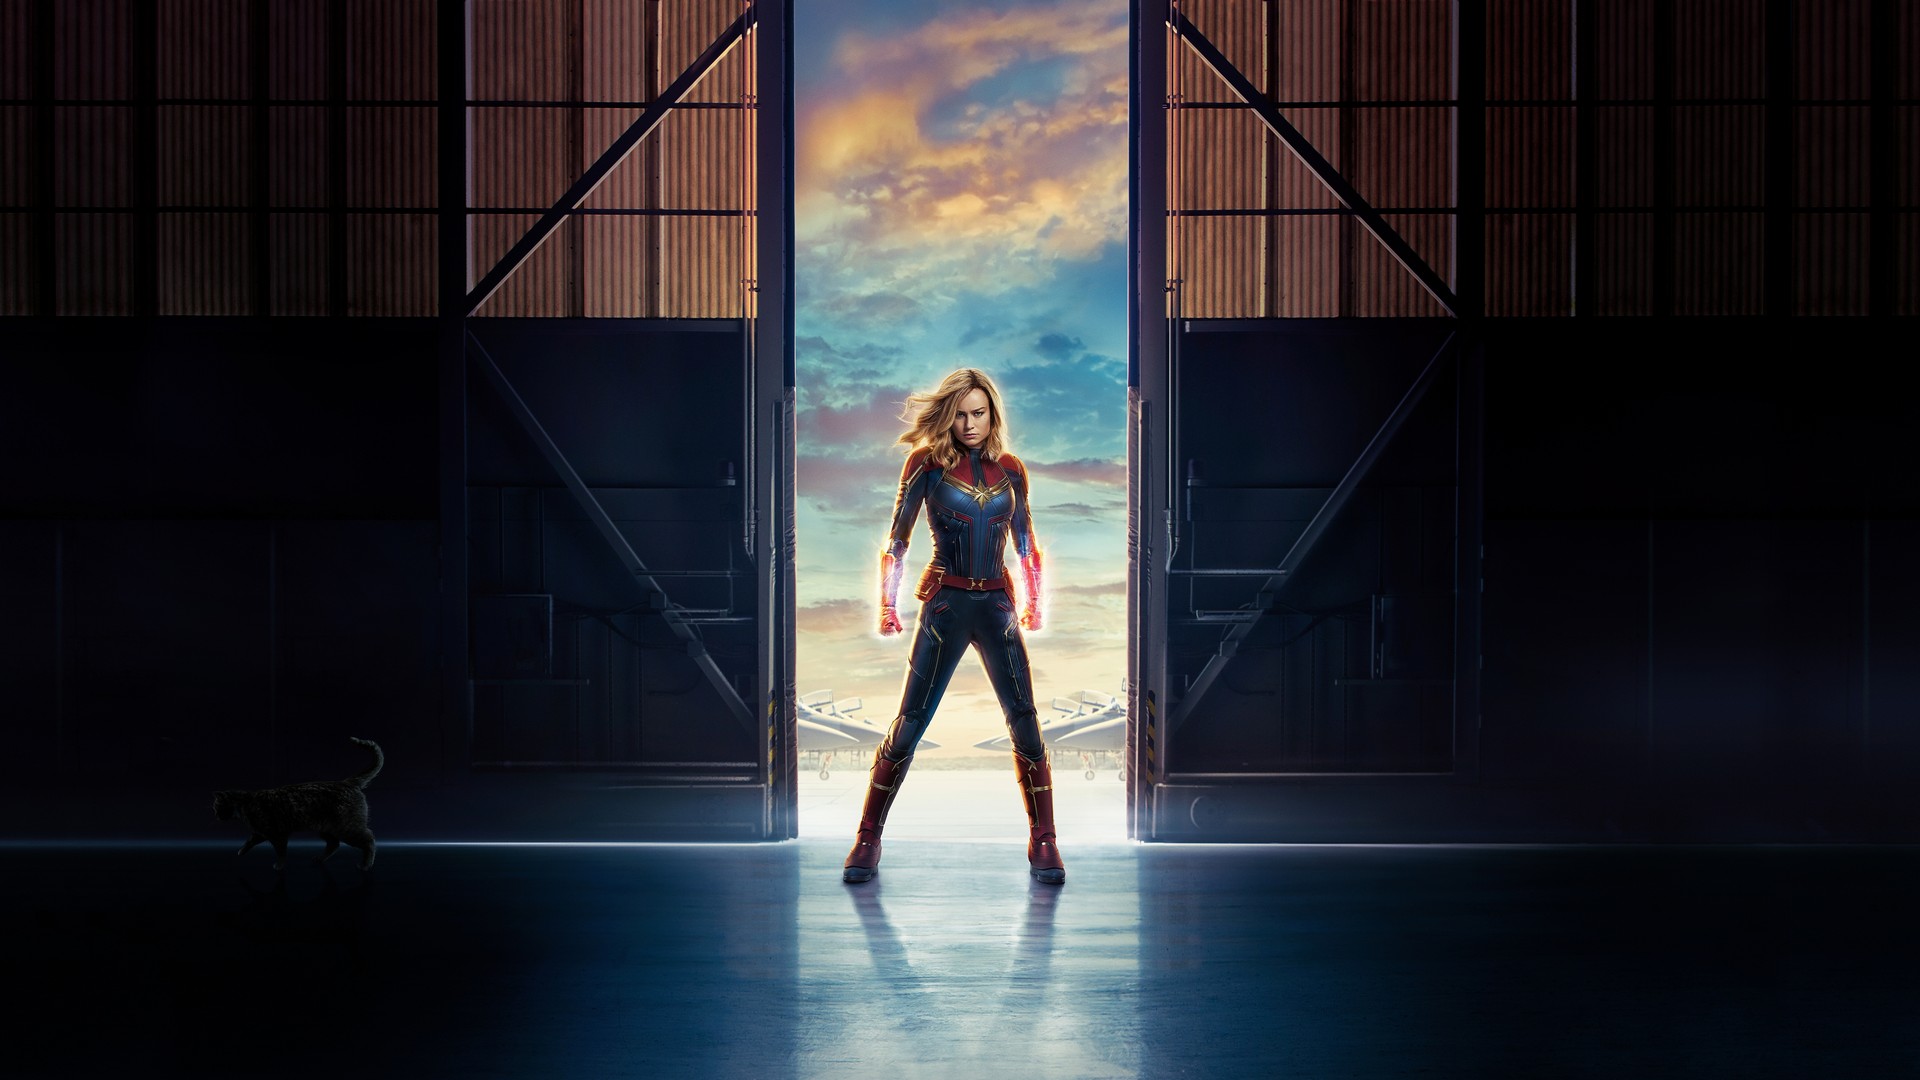 Captain Marvel 2019 Wallpaper HD with high-resolution 1920x1080 pixel. You can use this wallpaper for your Desktop Computer Backgrounds, Mac Wallpapers, Android Lock screen or iPhone Screensavers and another smartphone device